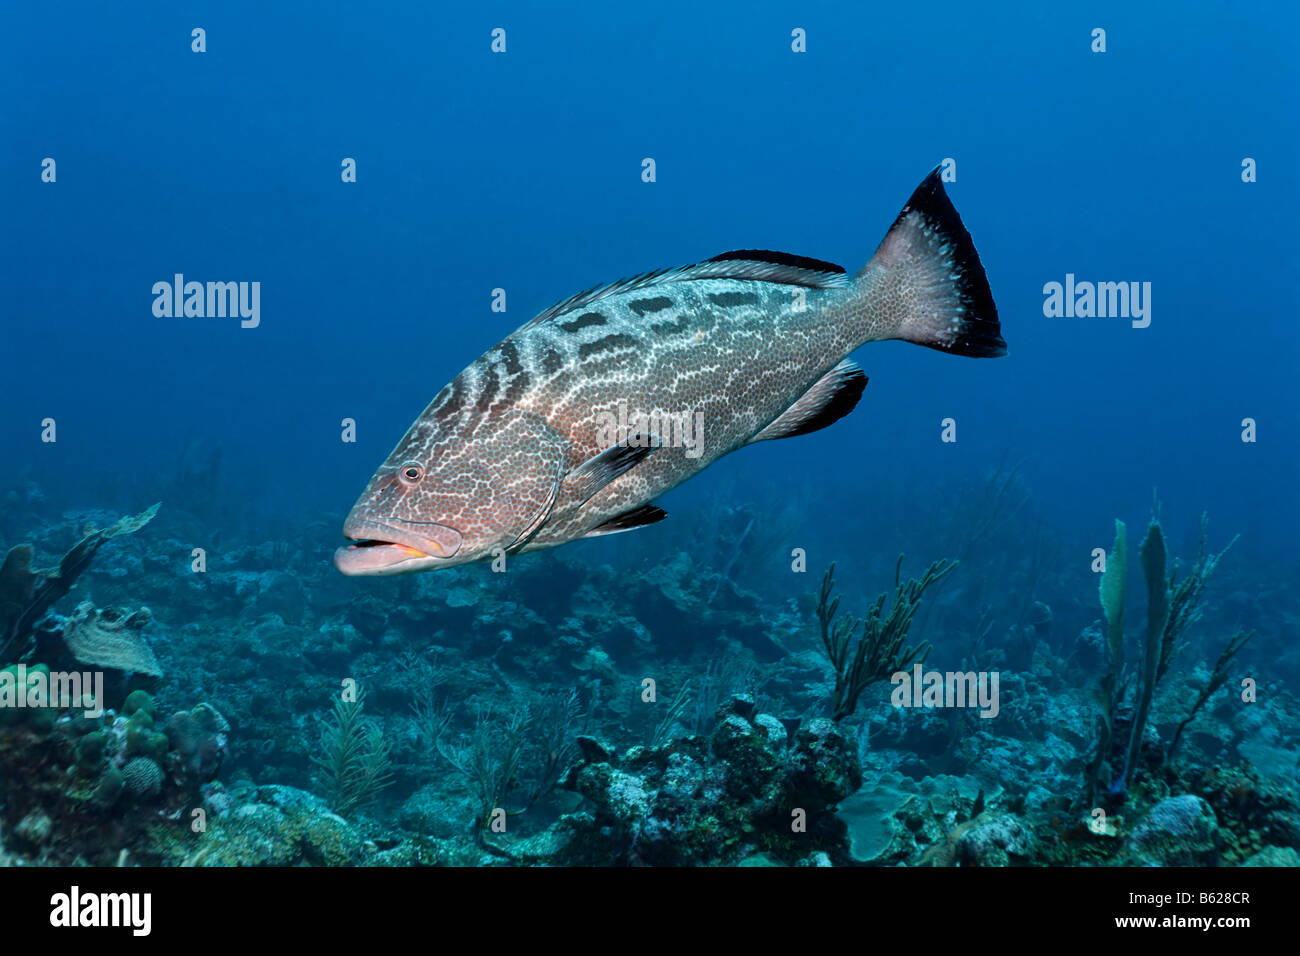 Black Grouper fish (Mycteroperca bonaci) swimming over a coral reef in search of prey, barrier reef, San Pedro, Ambergris Cay I Stock Photo